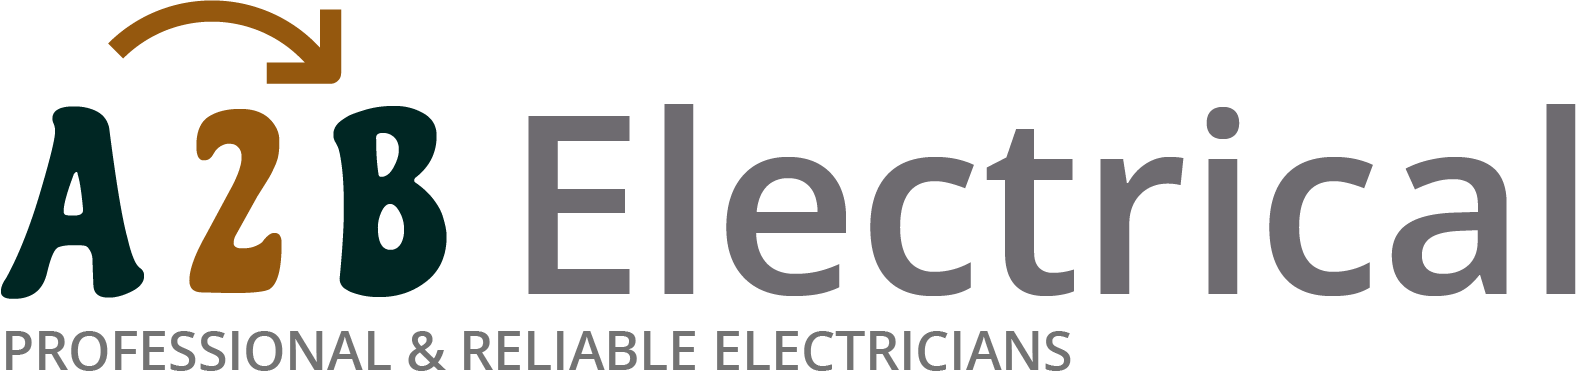 If you have electrical wiring problems in Swinton South Yorkshire, we can provide an electrician to have a look for you. 